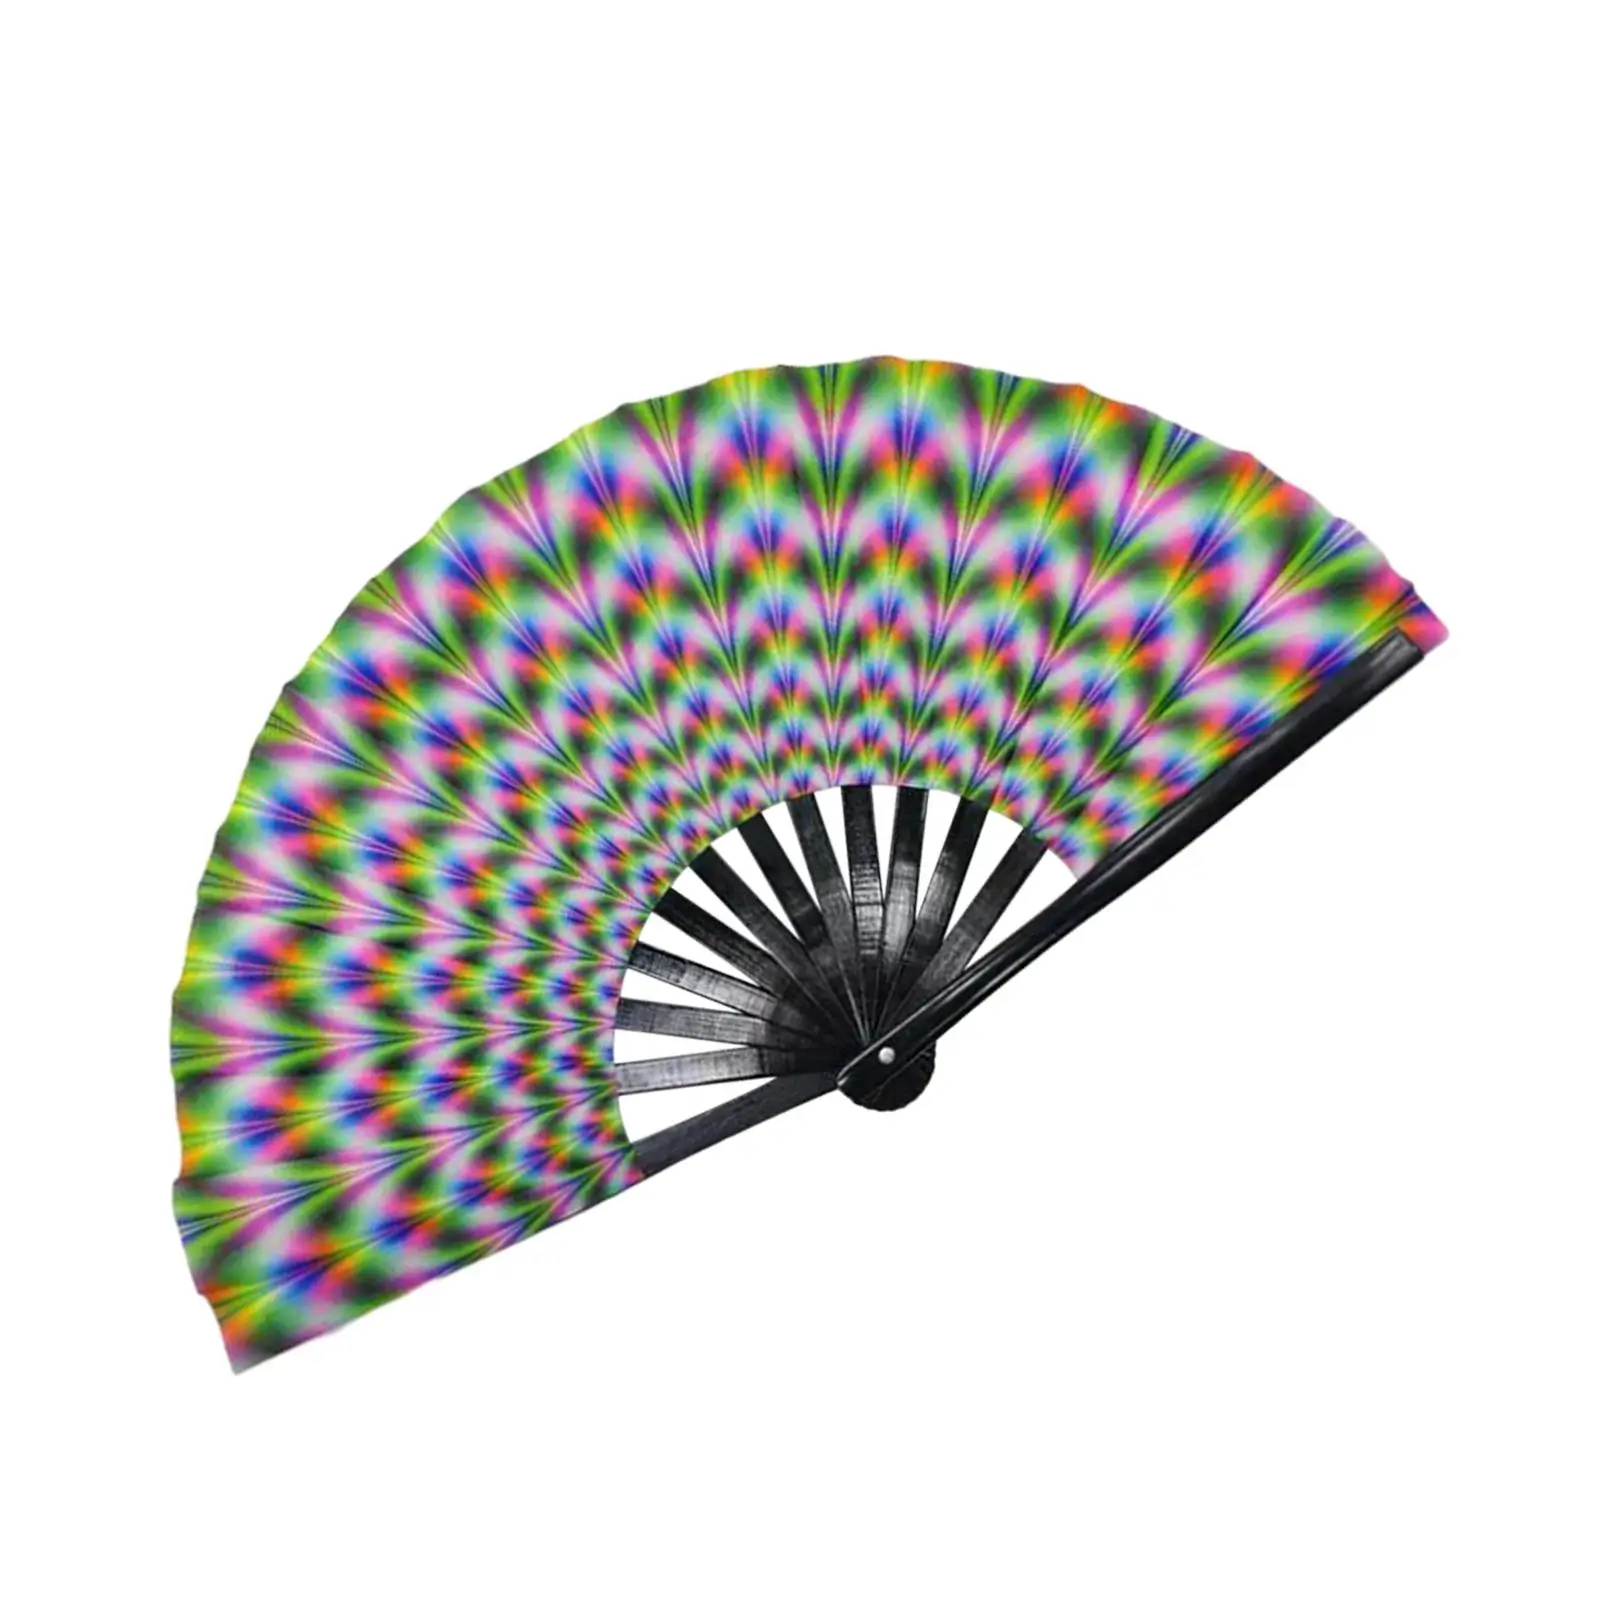 Rave Folding Hand Fan Fluorescent Effects Dress up for Dancing Props Masquerade Stage Show Performance Theater Party Accessories